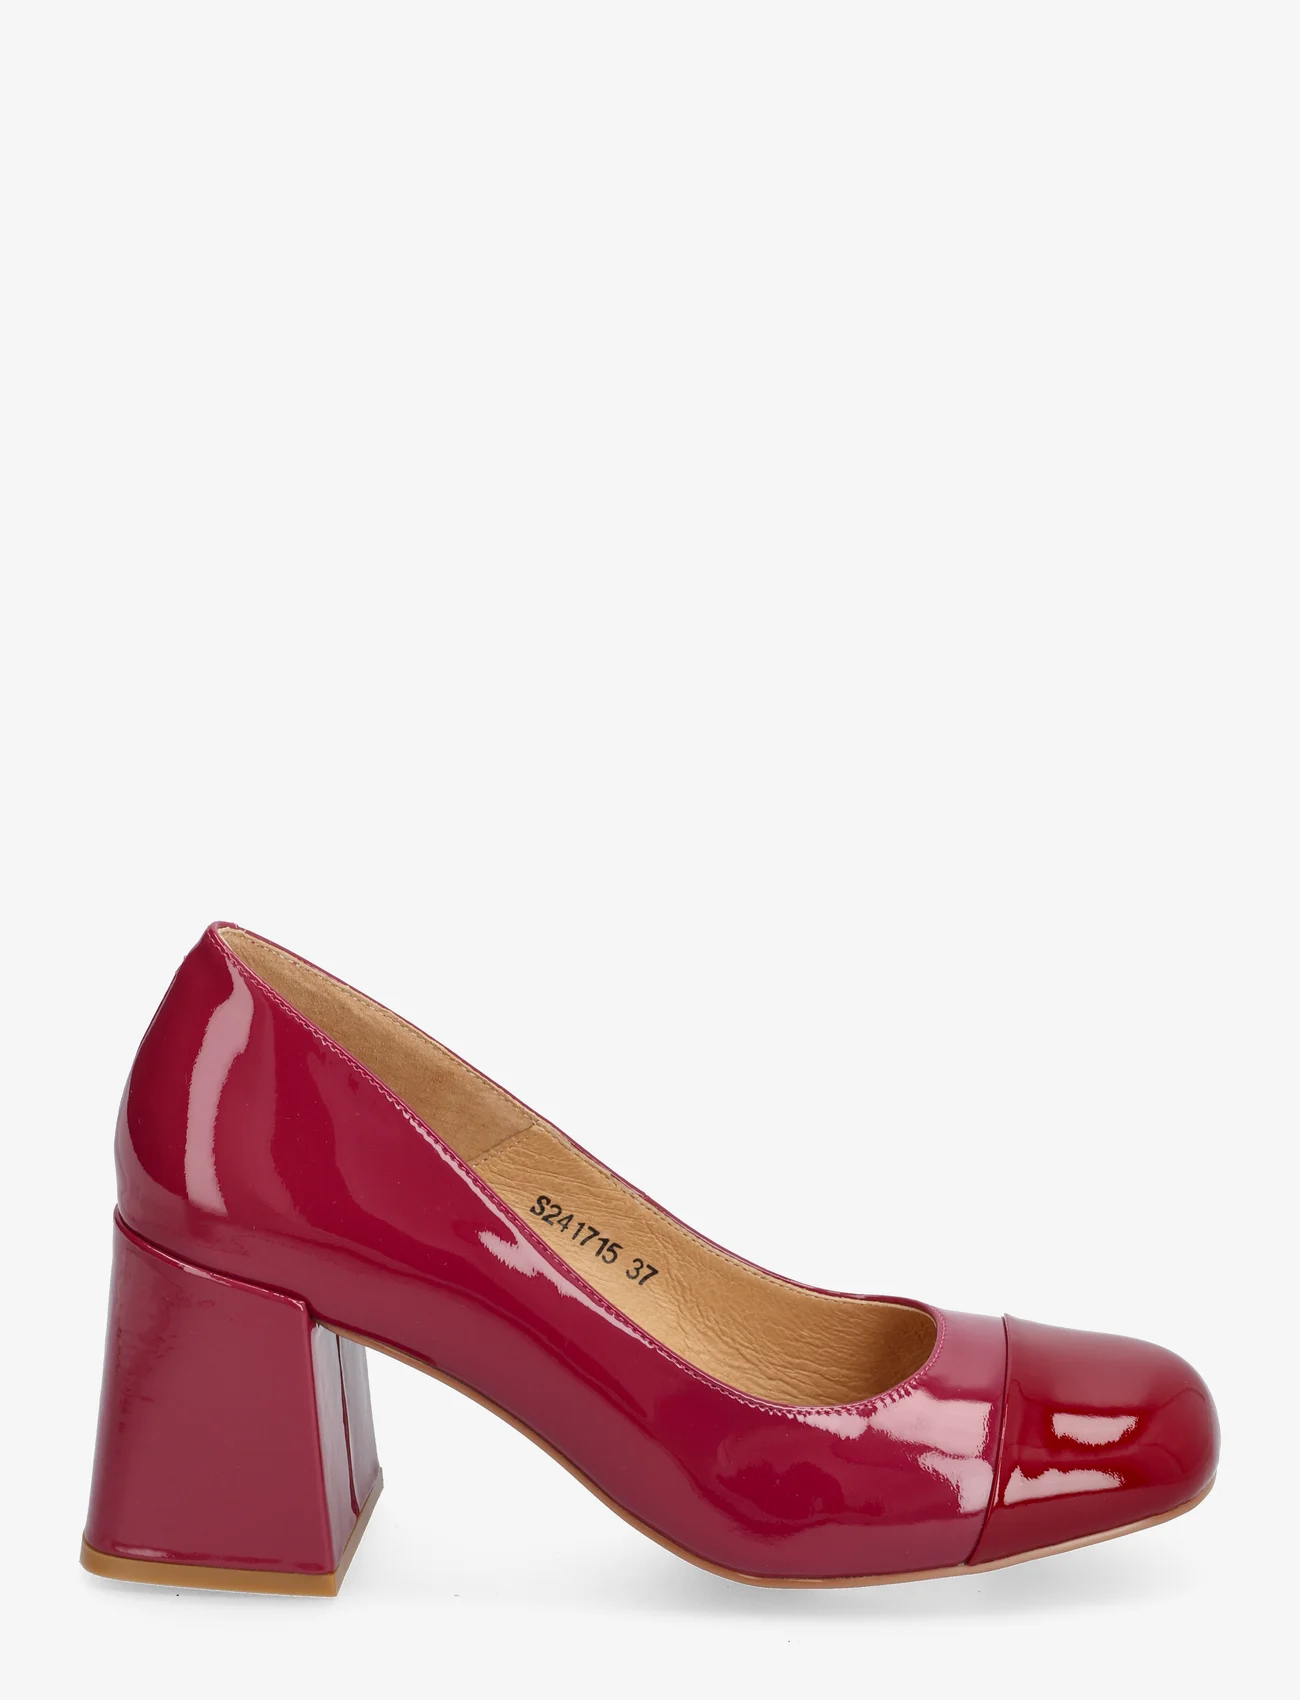 Sofie Schnoor - Stiletto - peoriided outlet-hindadega - berry red - 1